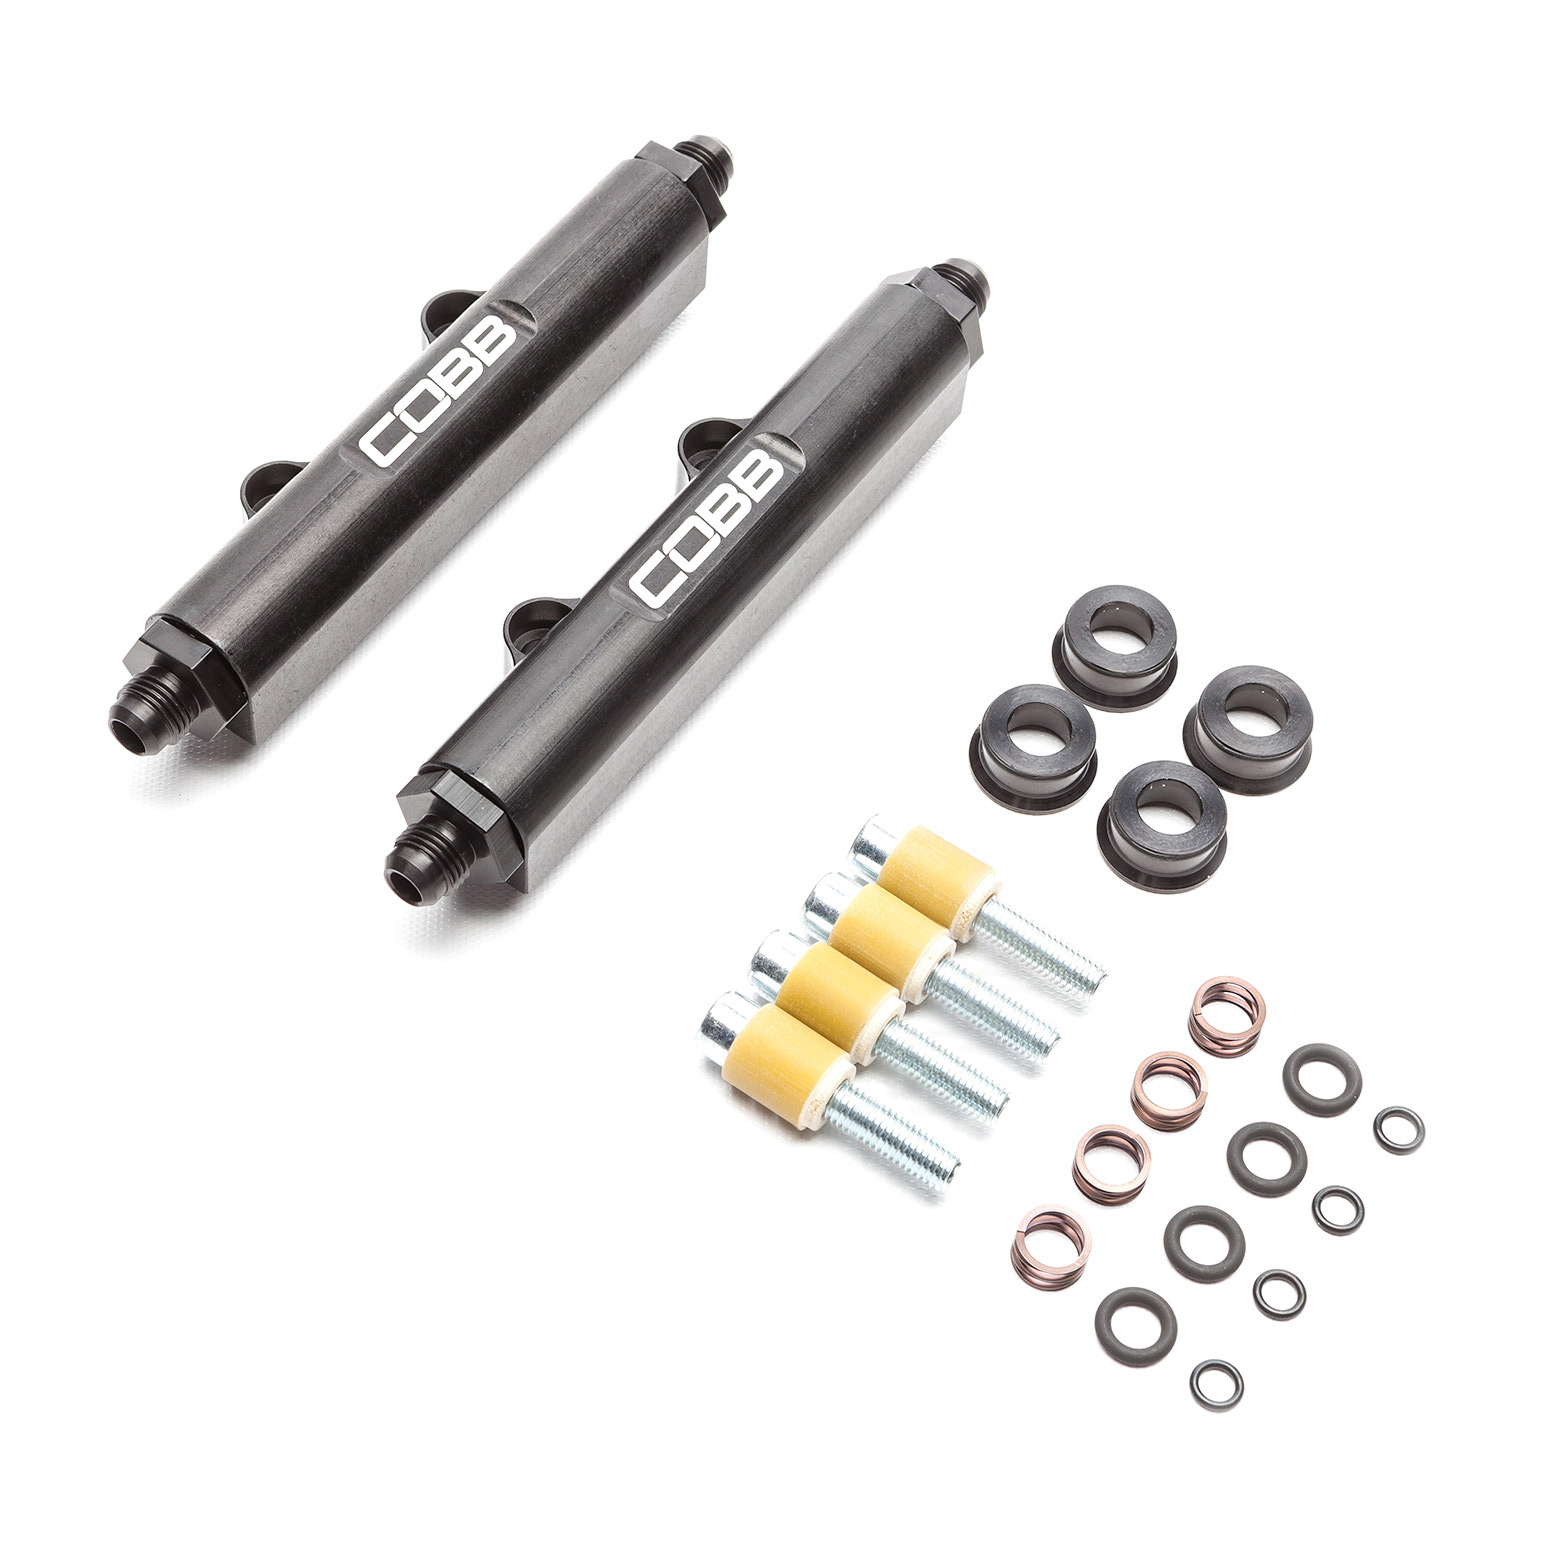 Subaru Side Feed to Top Feed Fuel Rail Conversion Kit with fittings STI 04-06, FXT 04-05, LGT 05-07